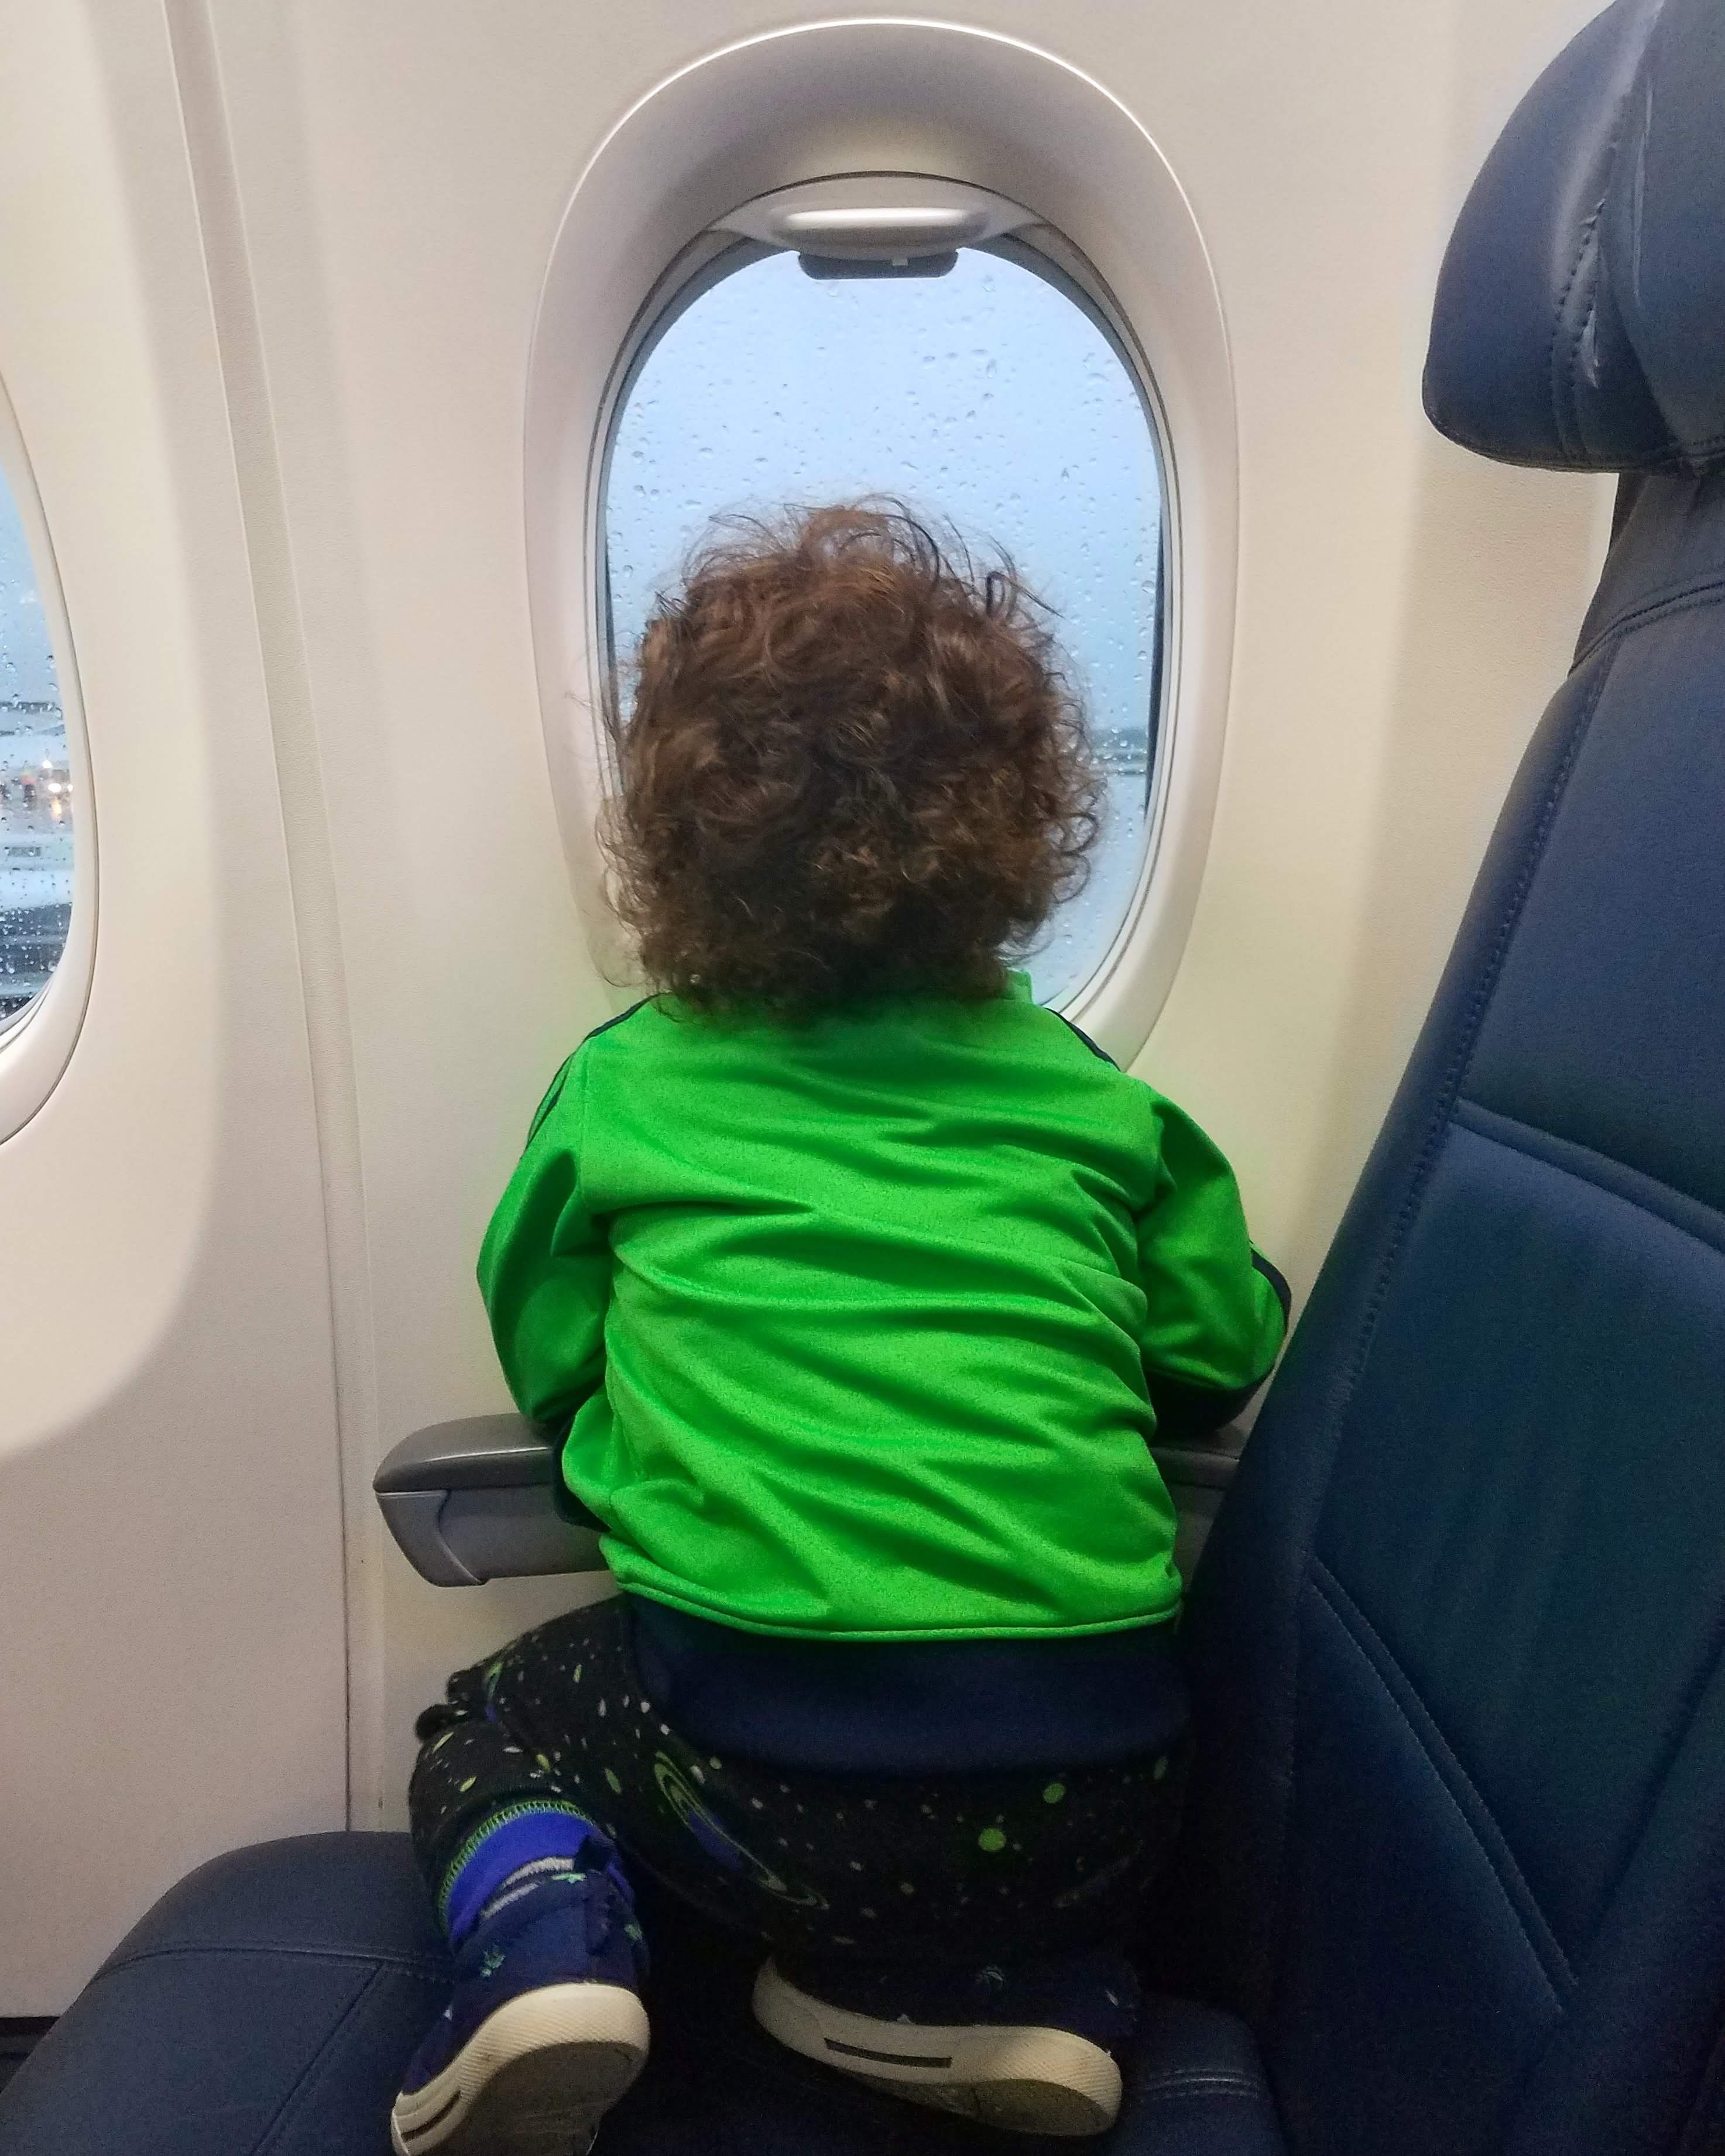 child looking out airplane window